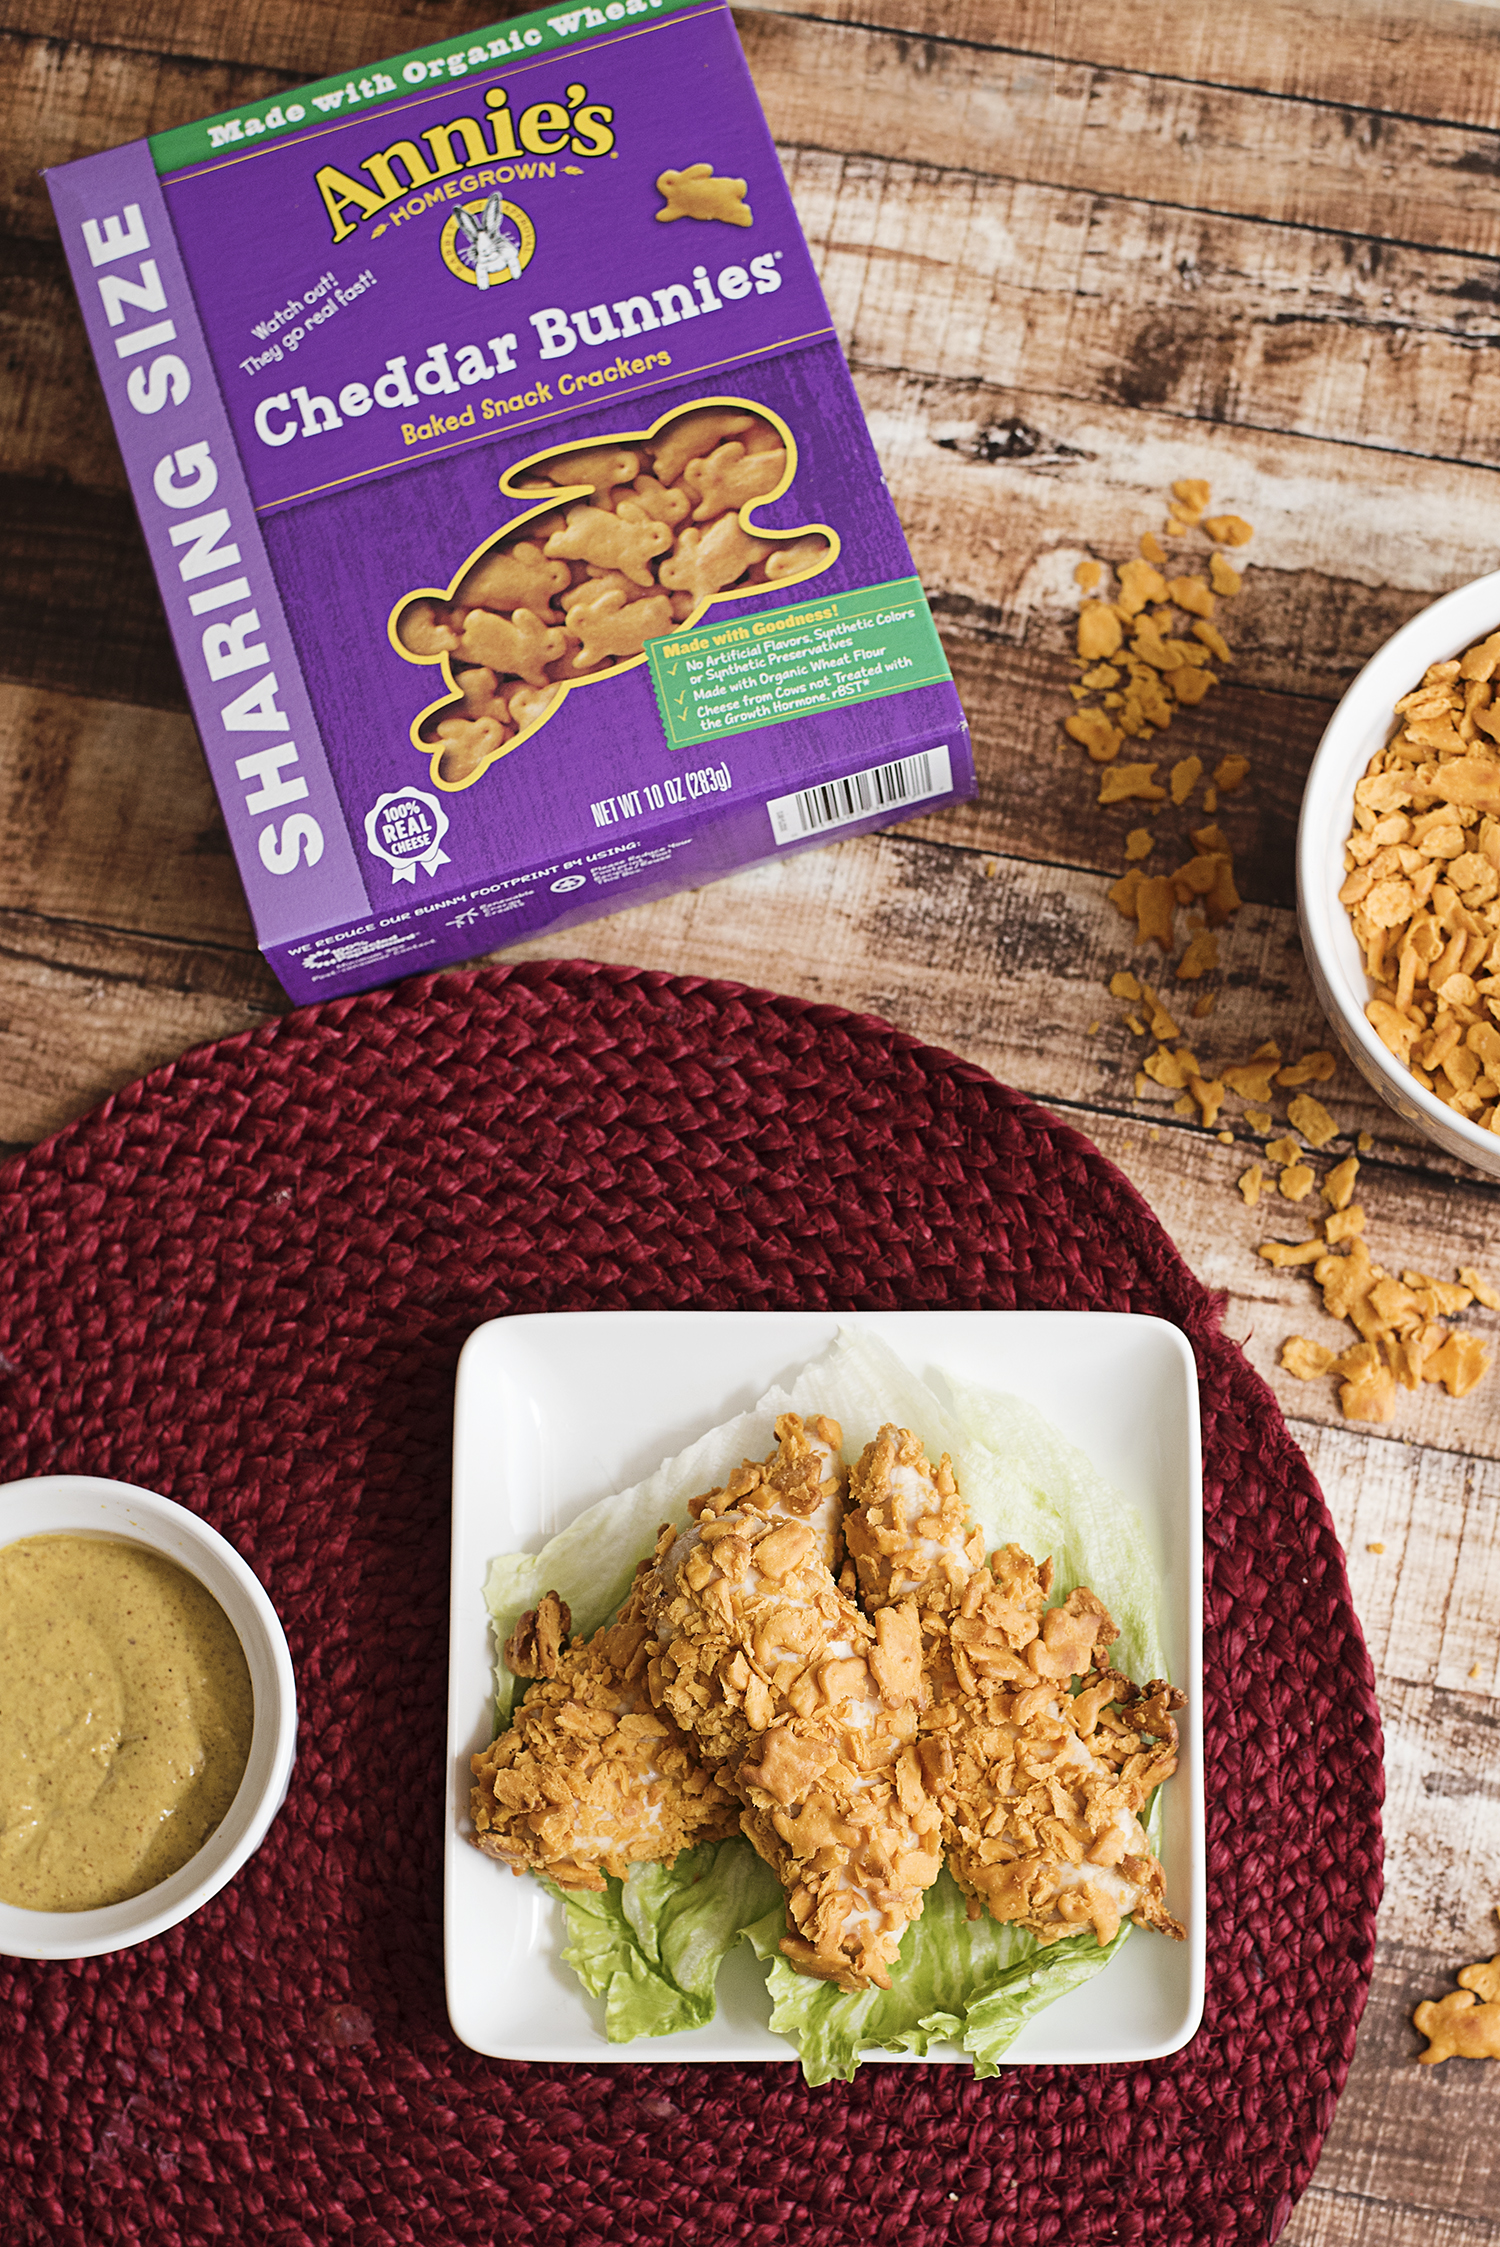 Looking to try a recipe for baked chicken fingers that are healthy and easy to make? These baked cheddar crusted chicken fingers are so easy to make and they make for a healthy kids dinner! Try it!